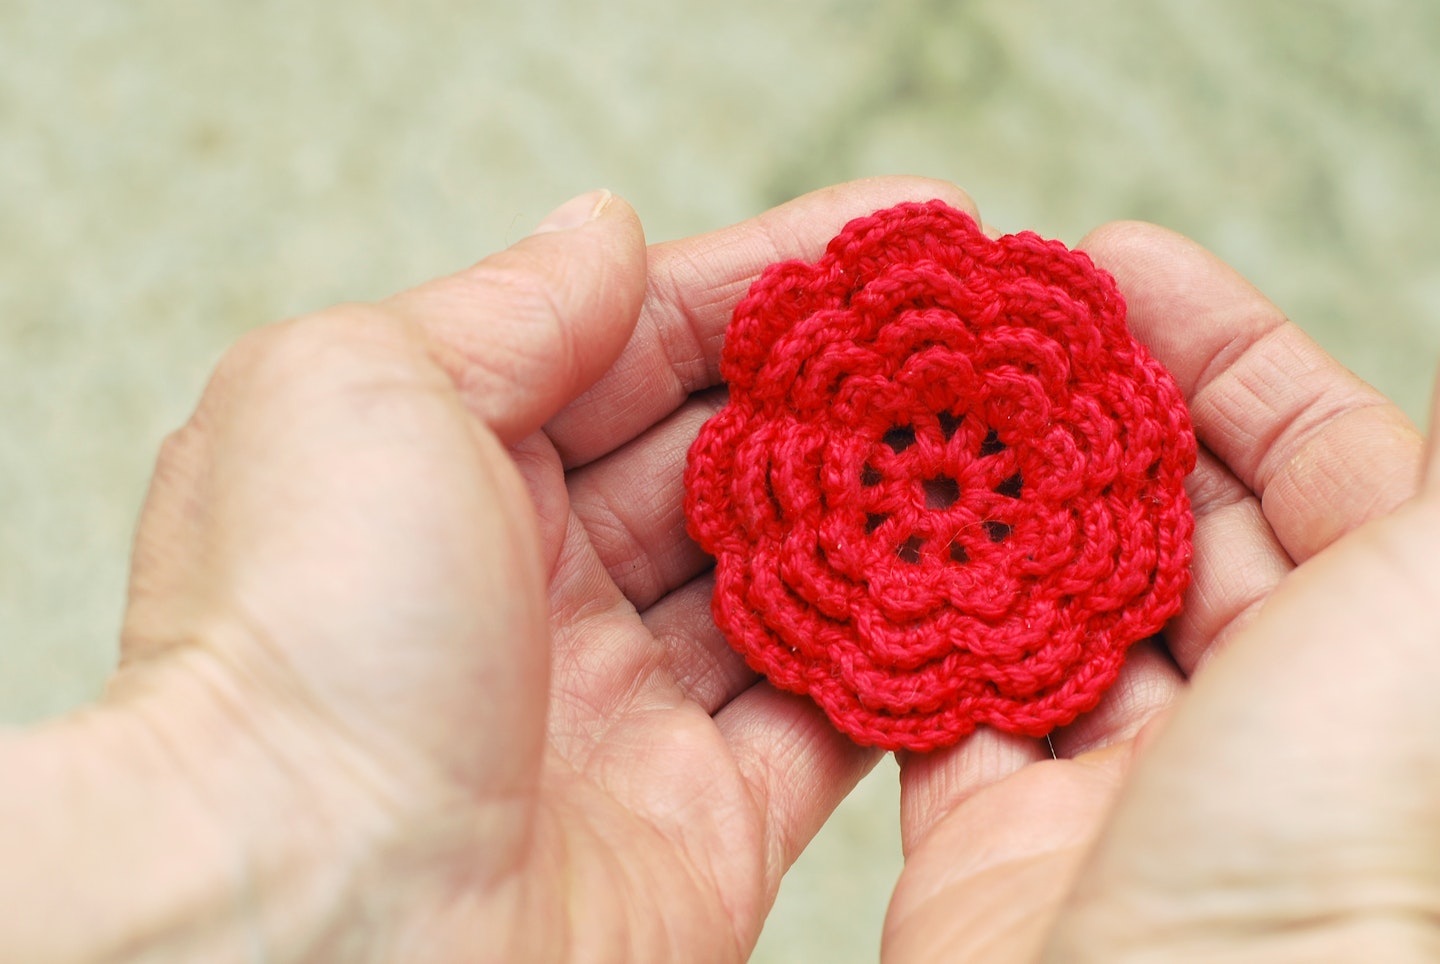 How to crochet a simple flower